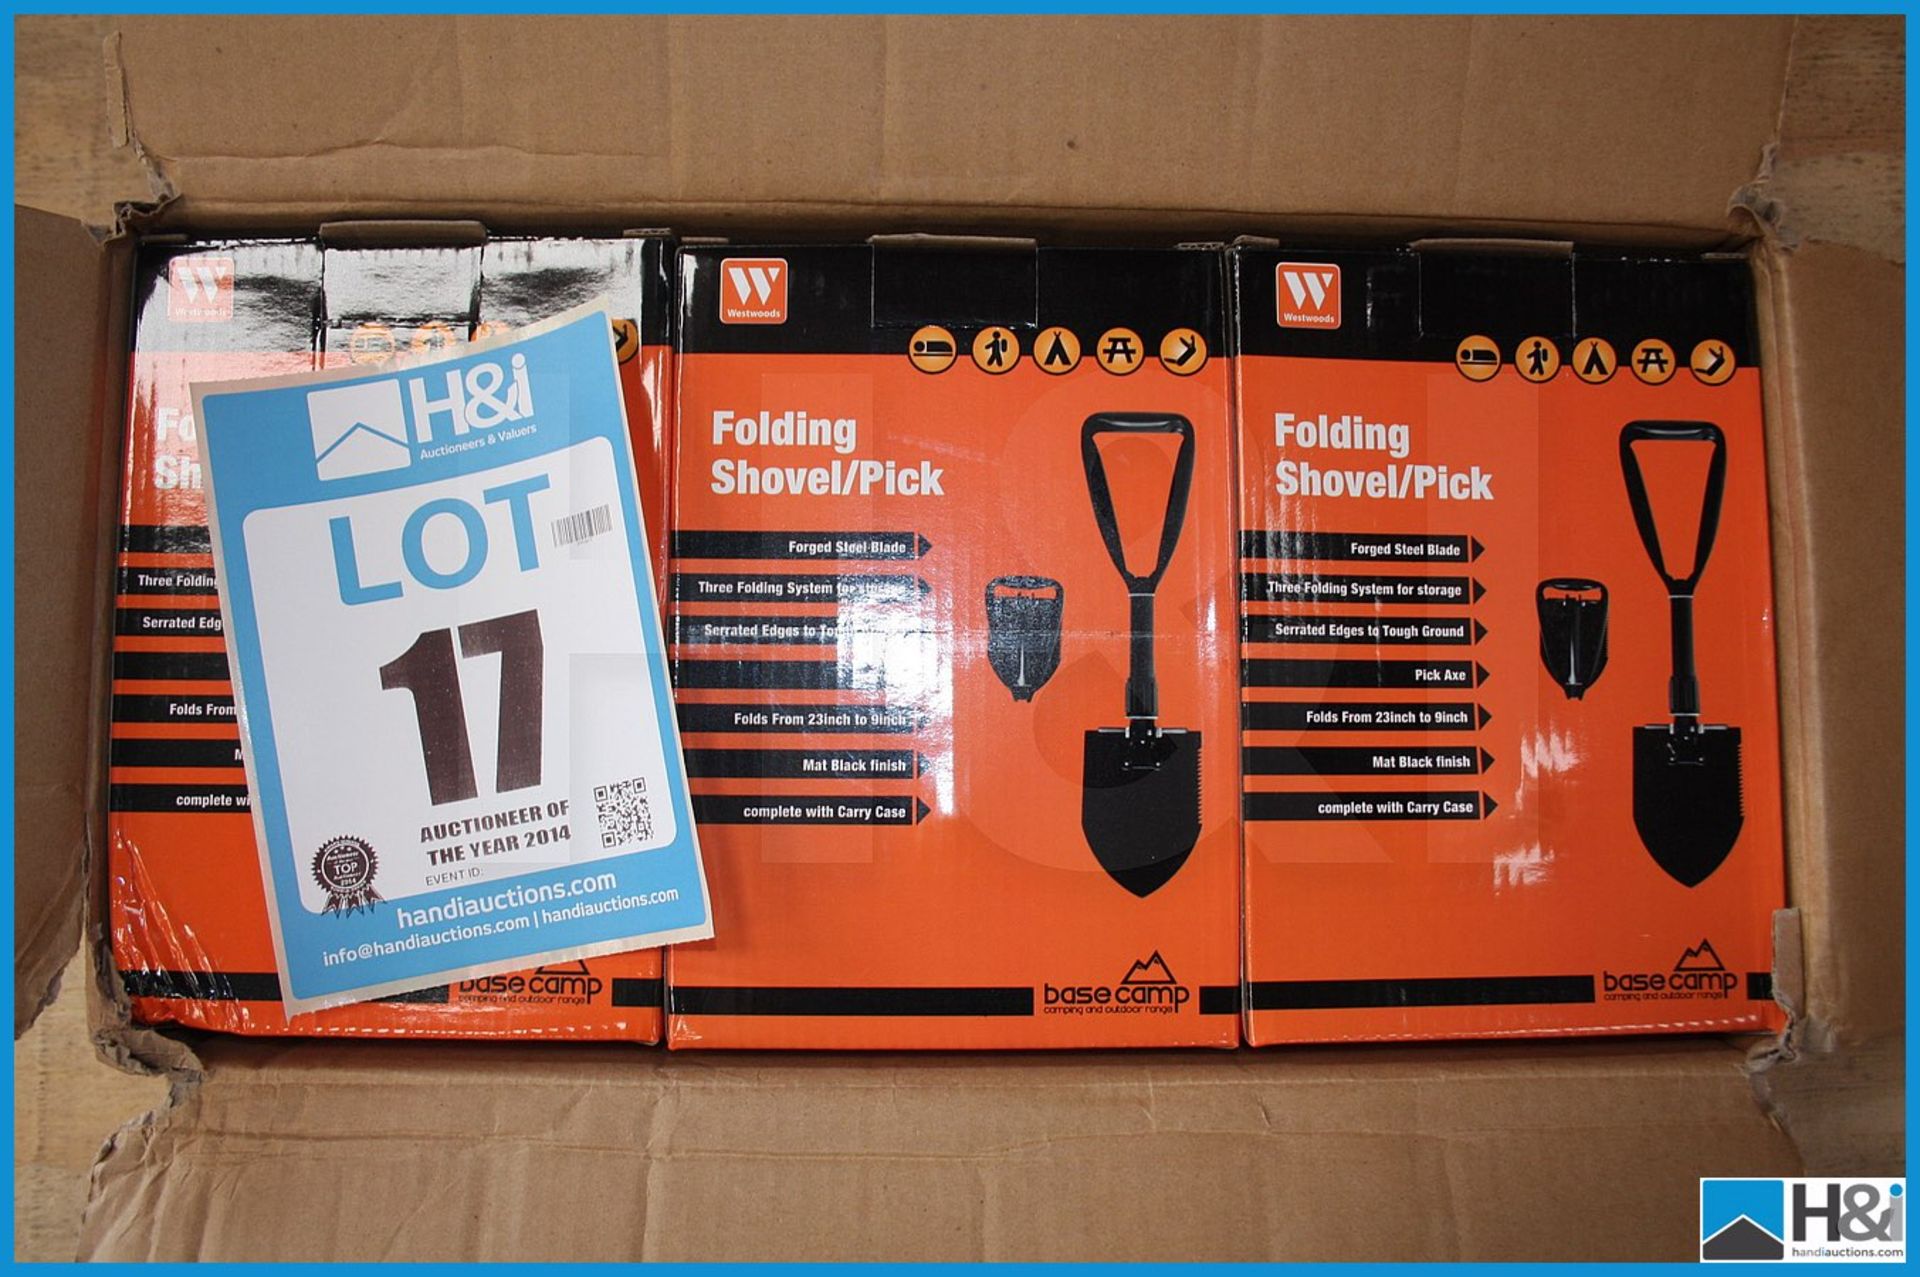 6 off Folding shovel and pick new and boxed Appraisal: Viewing Essential Serial No: NA Location: H&